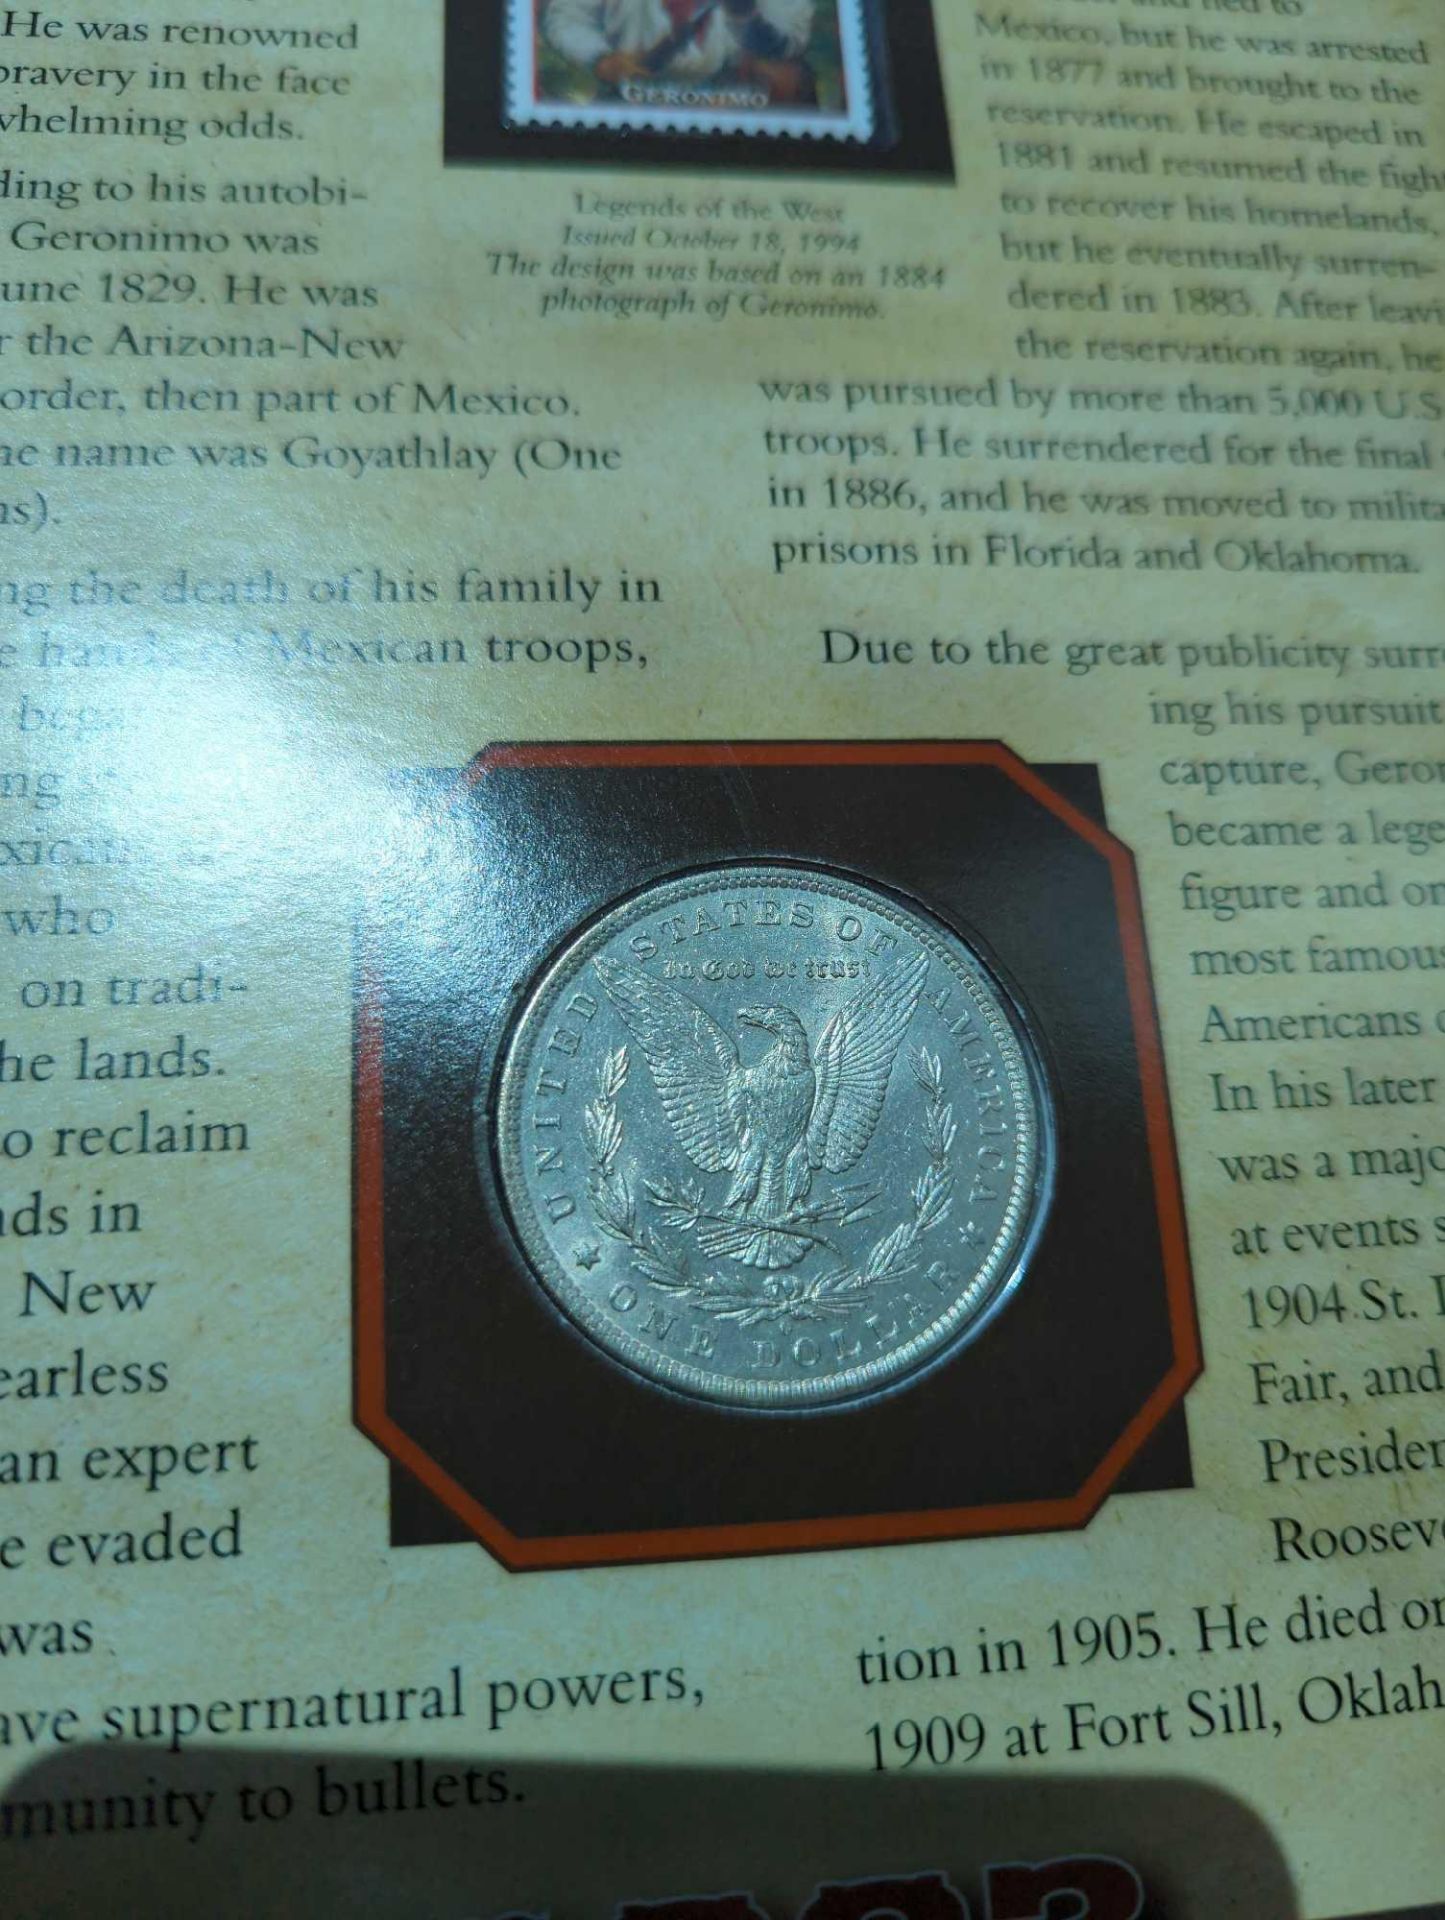 1883 Uncirculated Condition Morgan Dollar with Commemorative Geronimo stamp and facts - Image 5 of 7